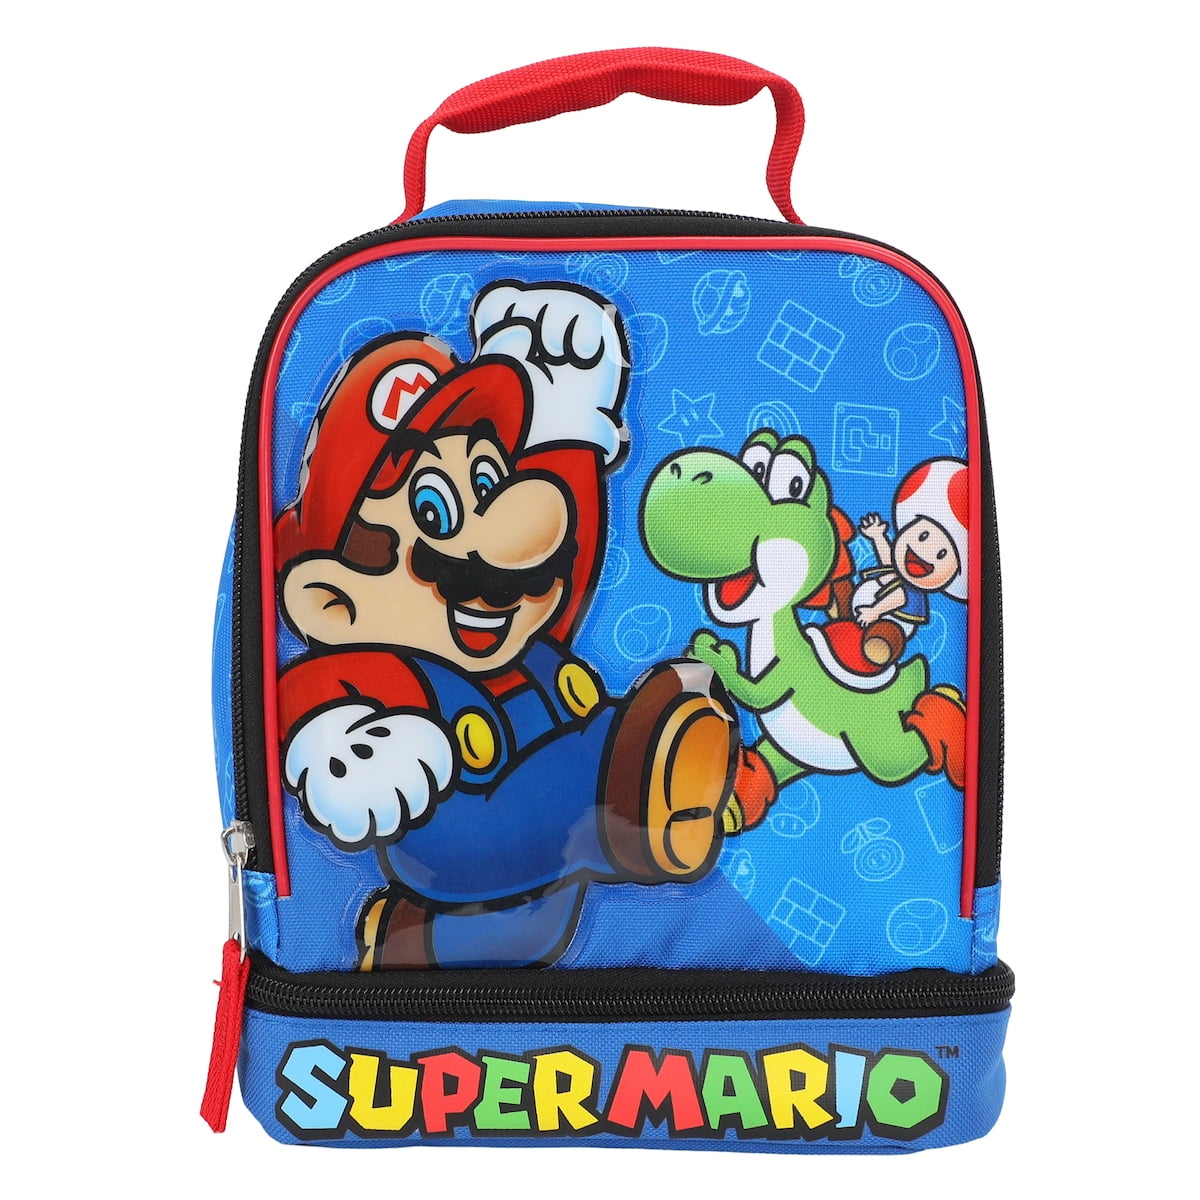 Super Mario Here We Go Lunch Bag